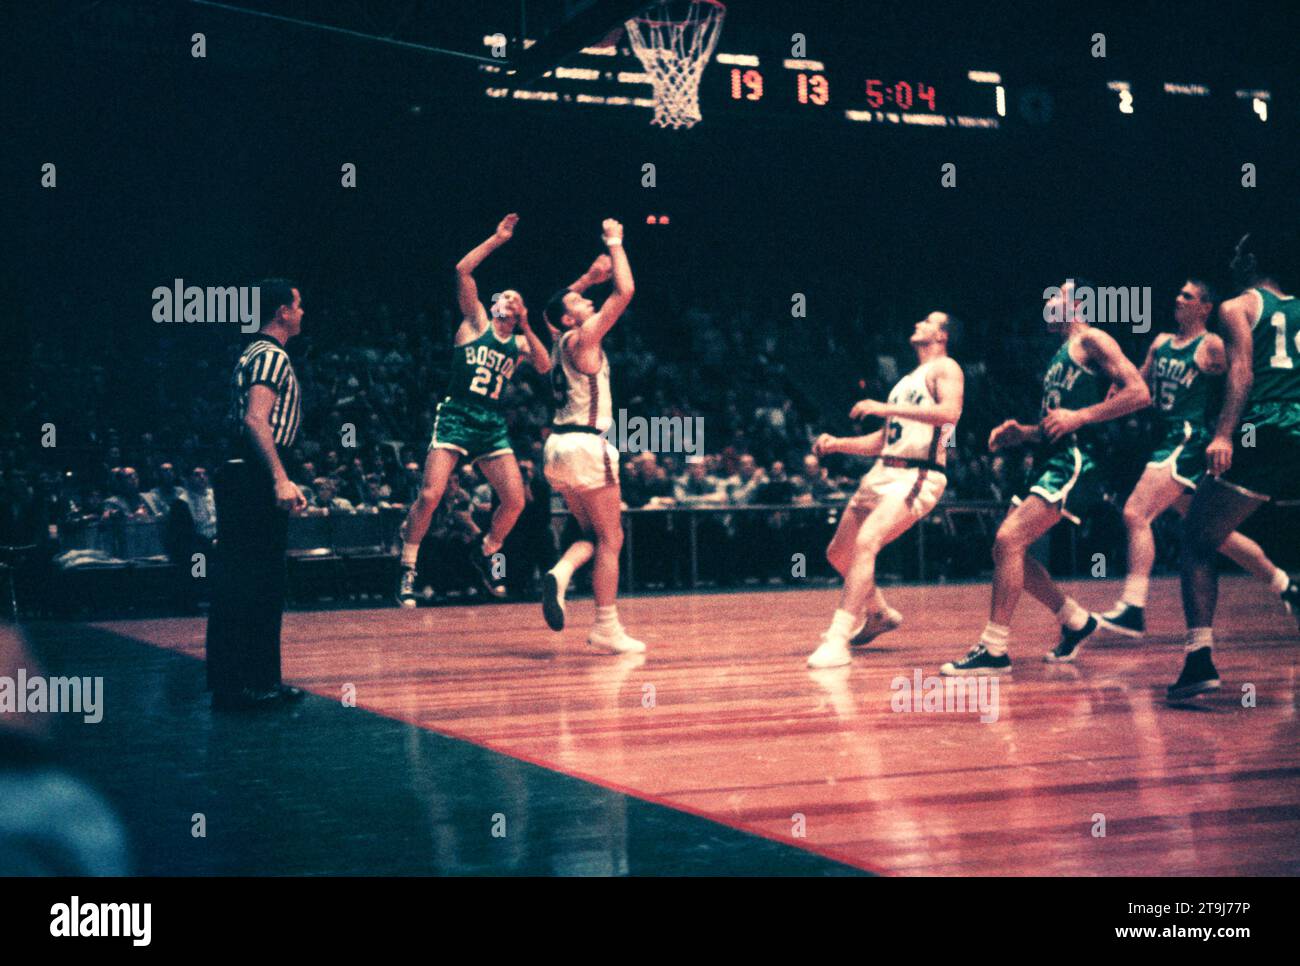 NEW YORK, NY - OCTOBER 25: Bill Sharman #21 of the Boston Celtics shoots as Richie Guerin #9 of the New York Knicks defends during an NBA game on October 25, 1958 at the Madison Square Garden in New York, New York.  (Photo by Hy Peskin) *** Local Caption *** Bill Sharman;Richie Guerin Stock Photo